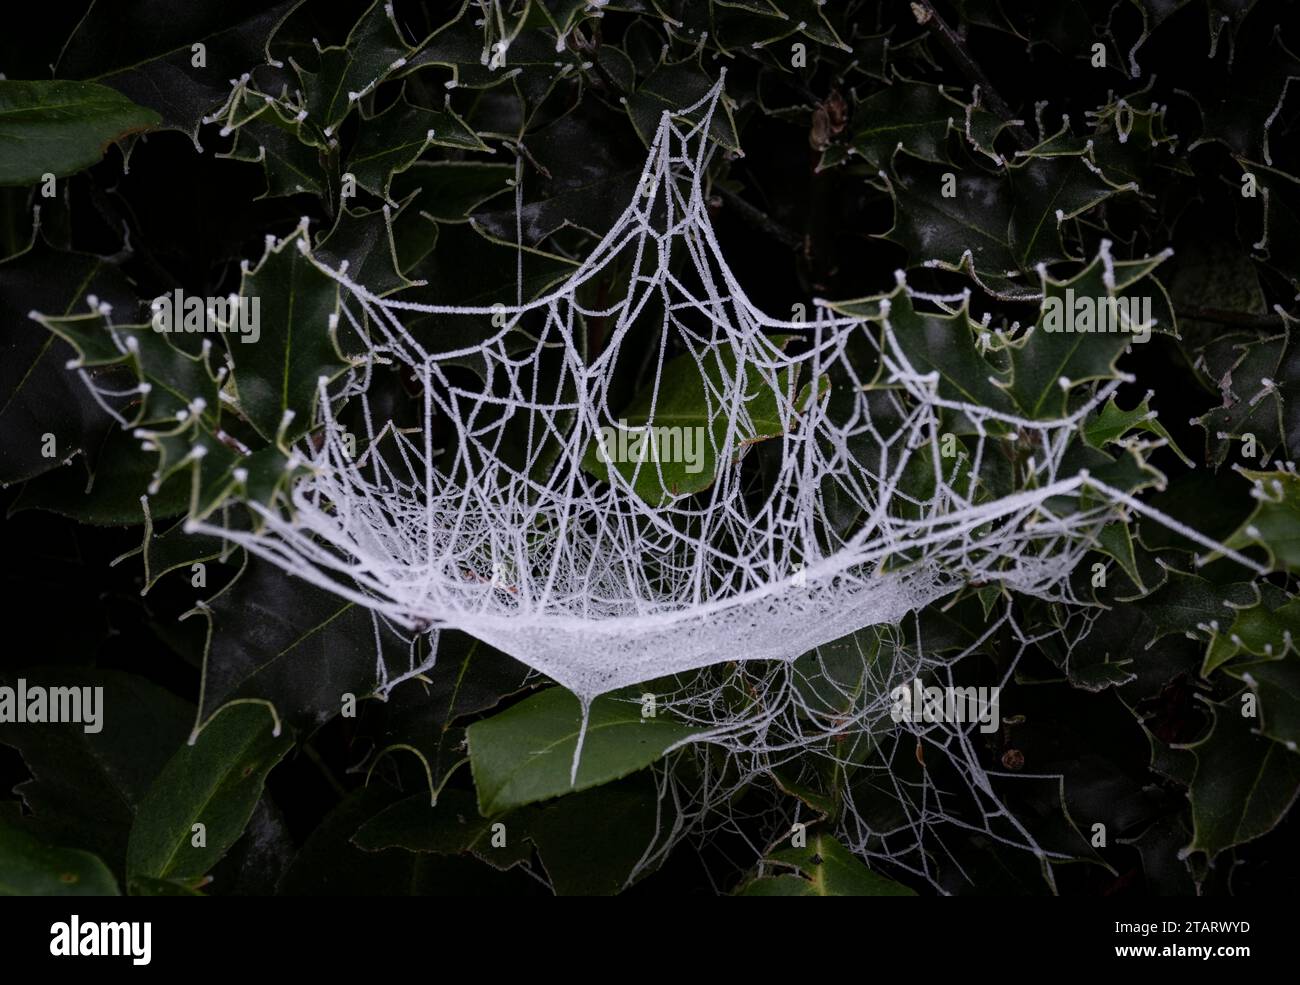 An intricate spiders web woven in a hedgerow shrouded in heavy winter frost, Worcestershire, England. Stock Photo